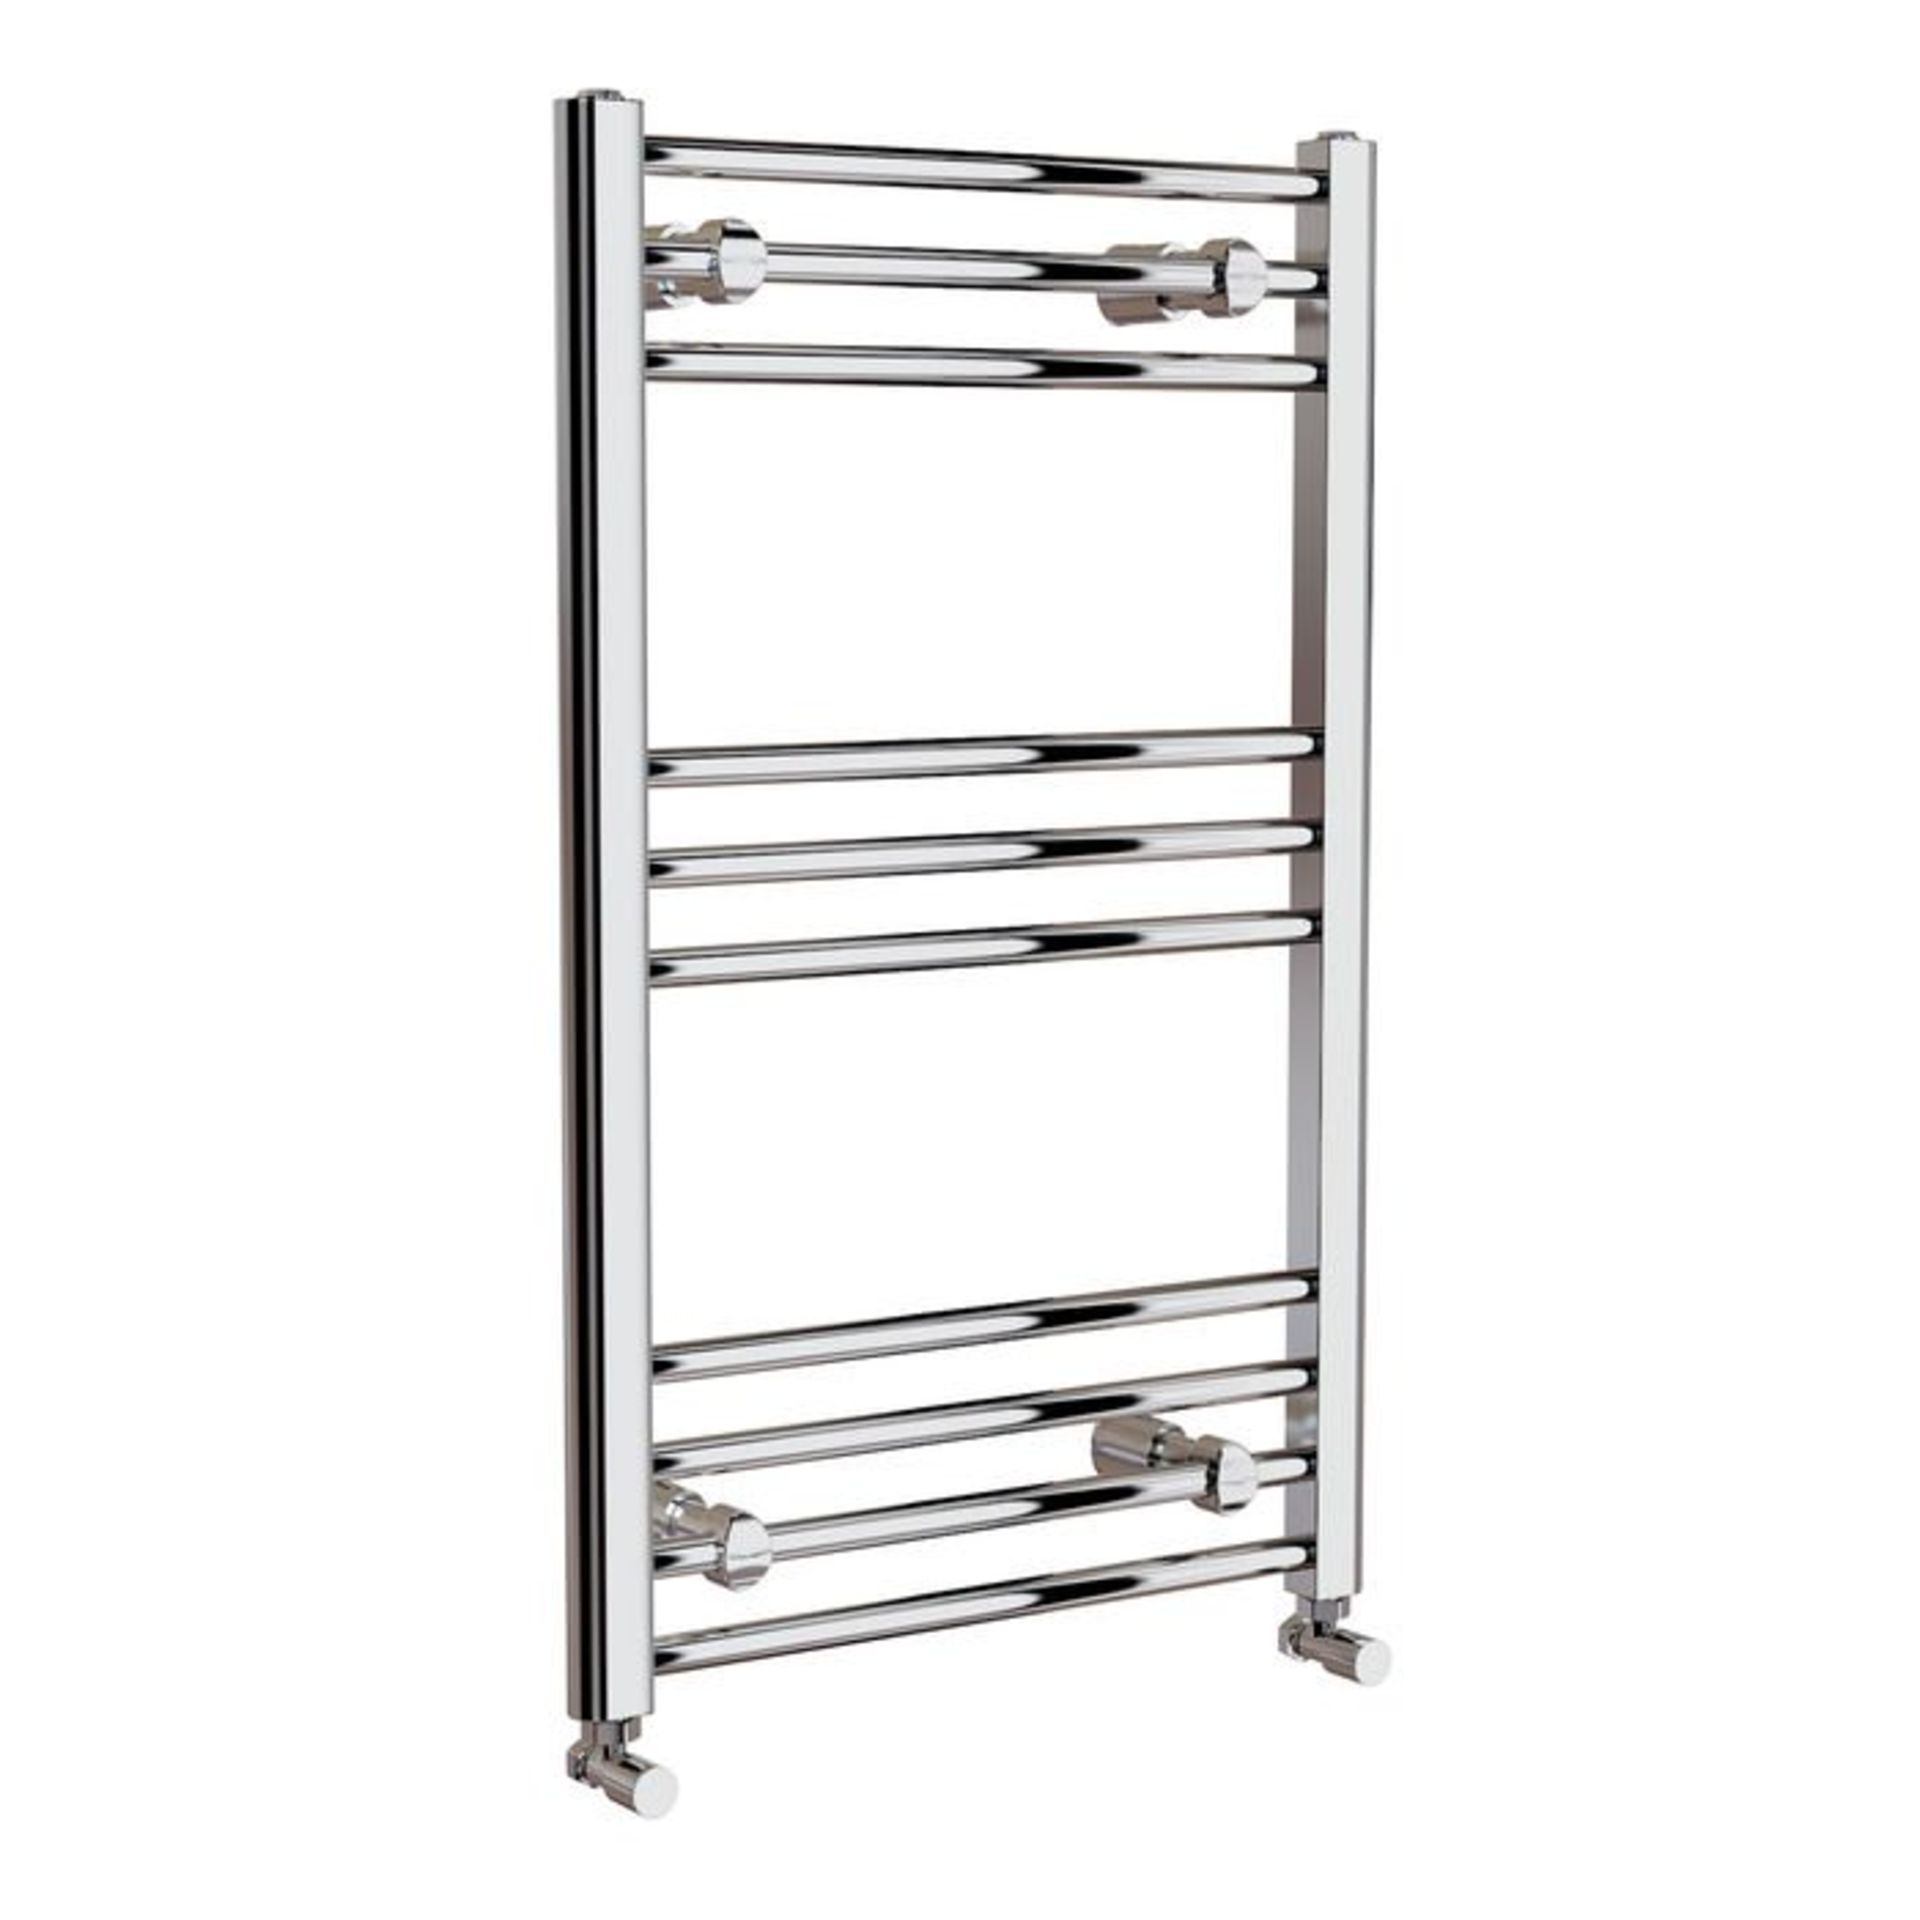 (H44) 800x500mm - 20mm Tubes - Chrome Heated Straight Rail Ladder Towel Radiator Low carbon steel - Image 3 of 3